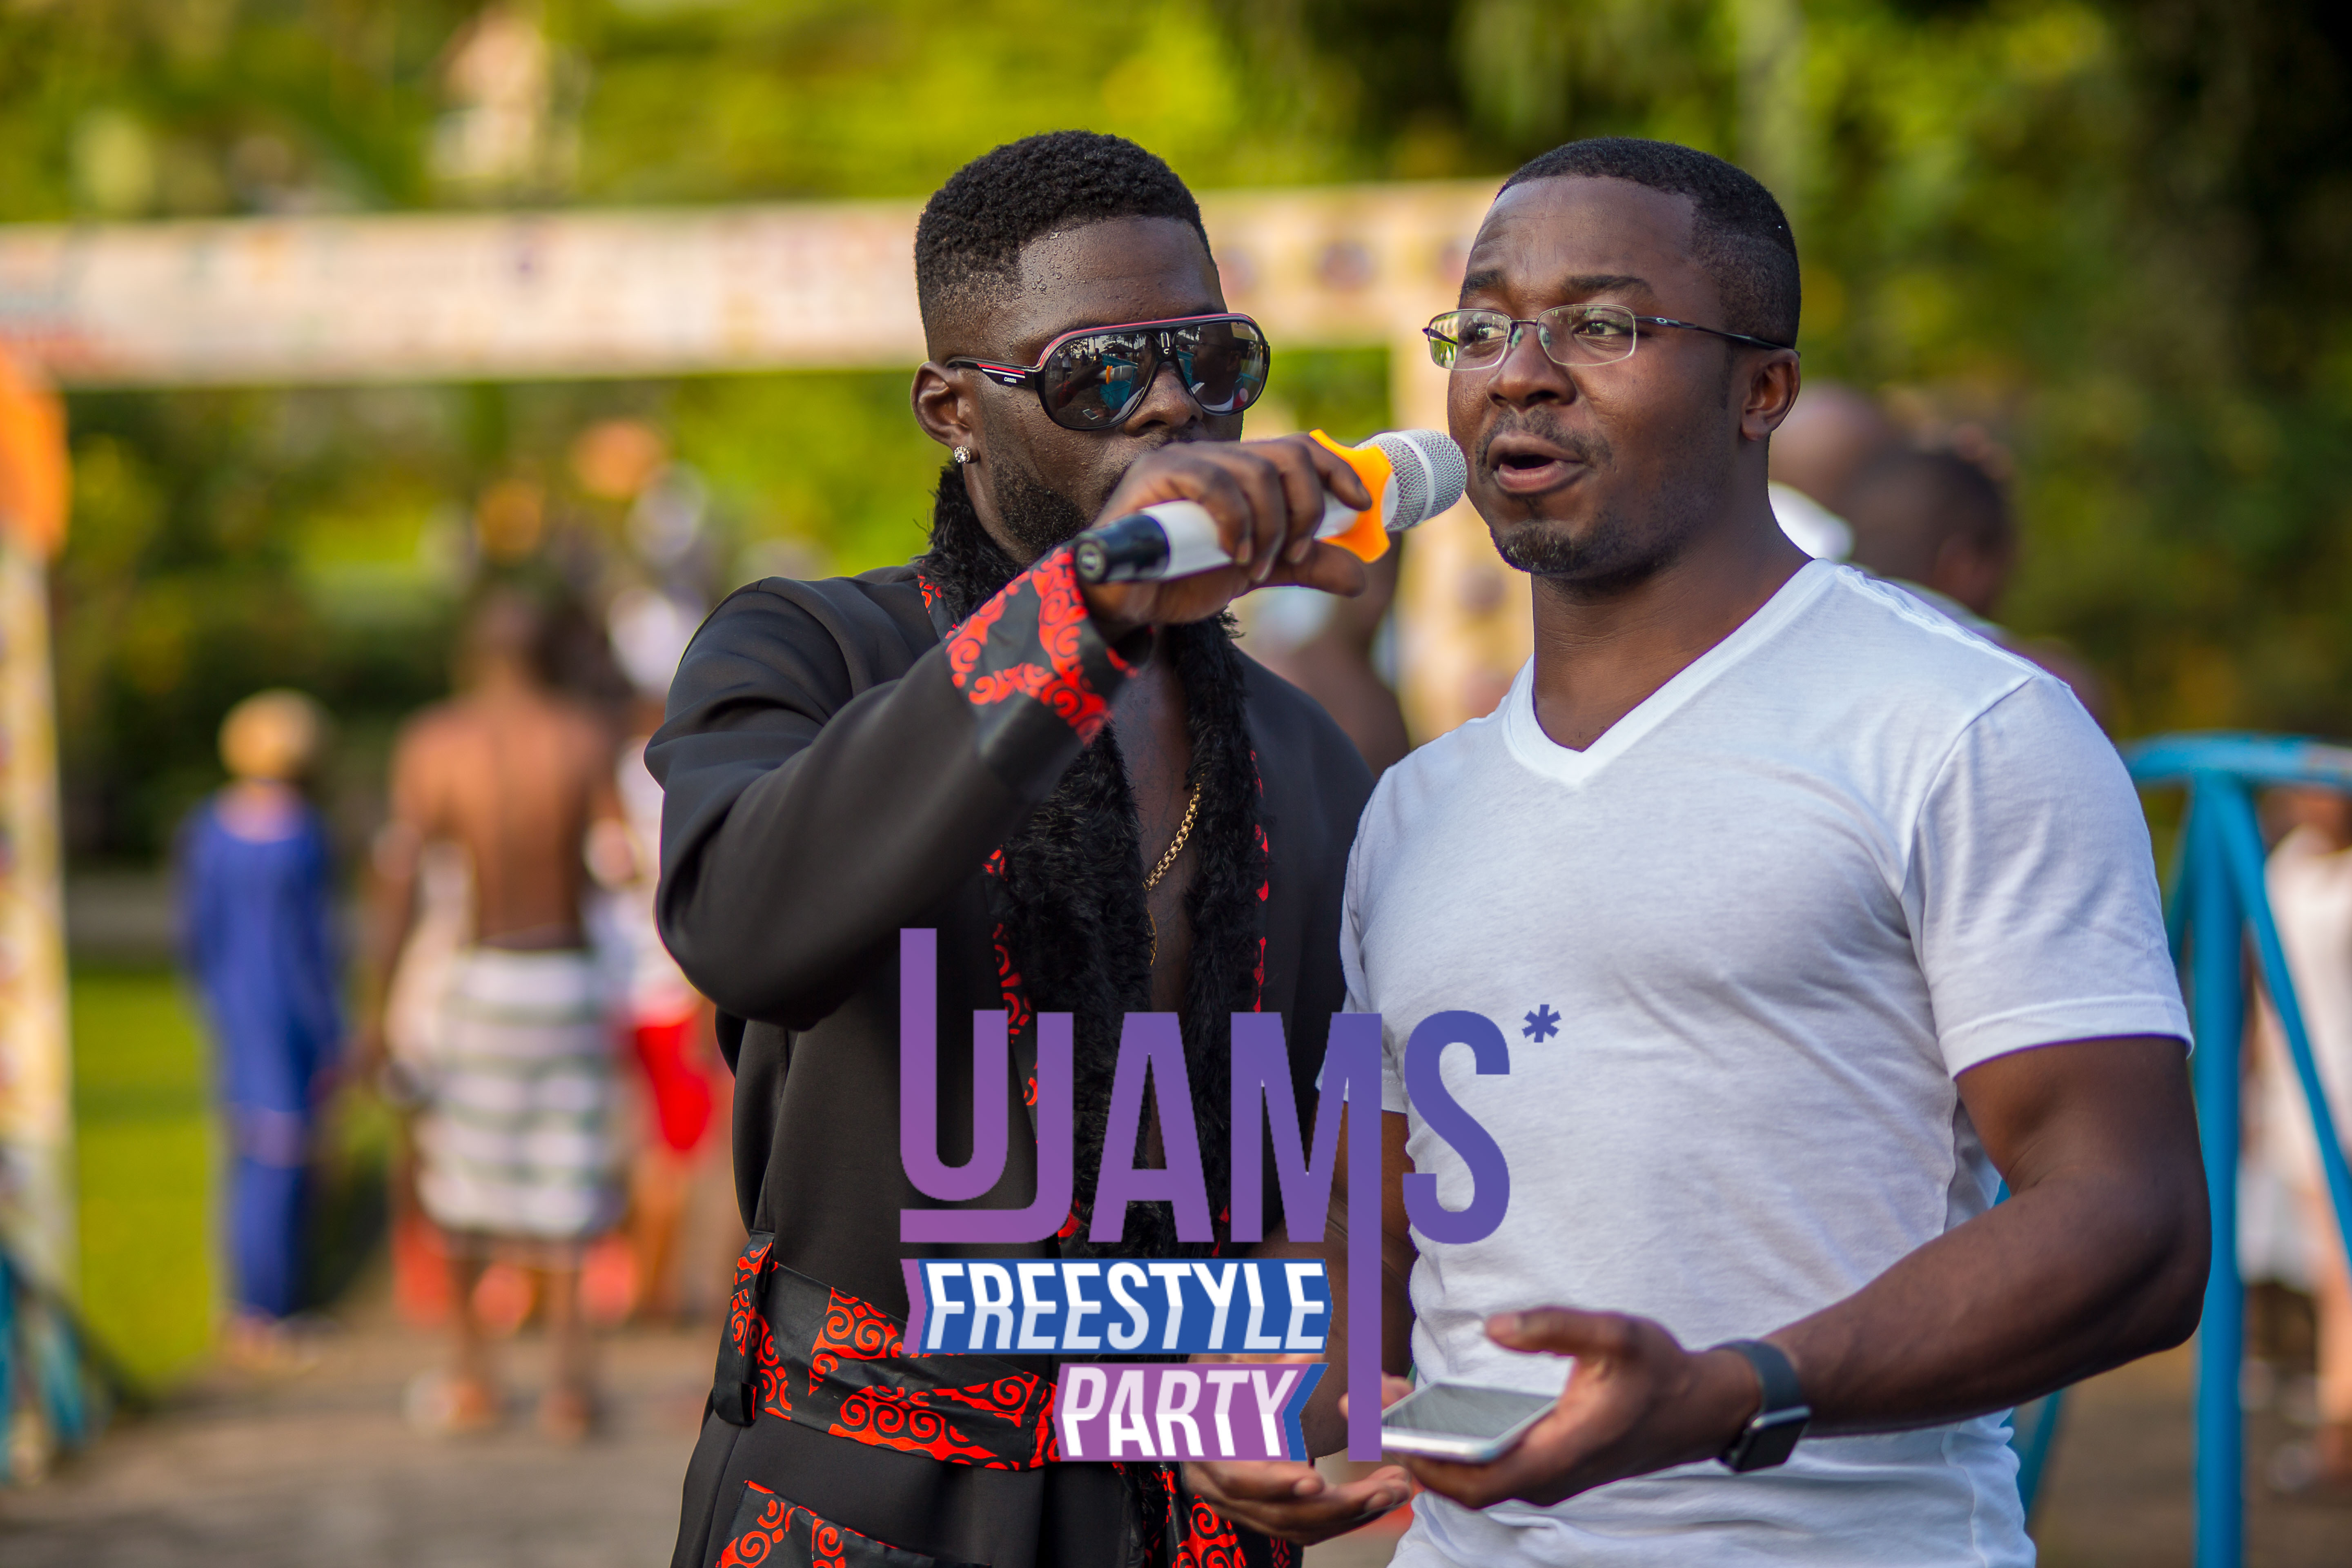 ujams freestyle party pictures